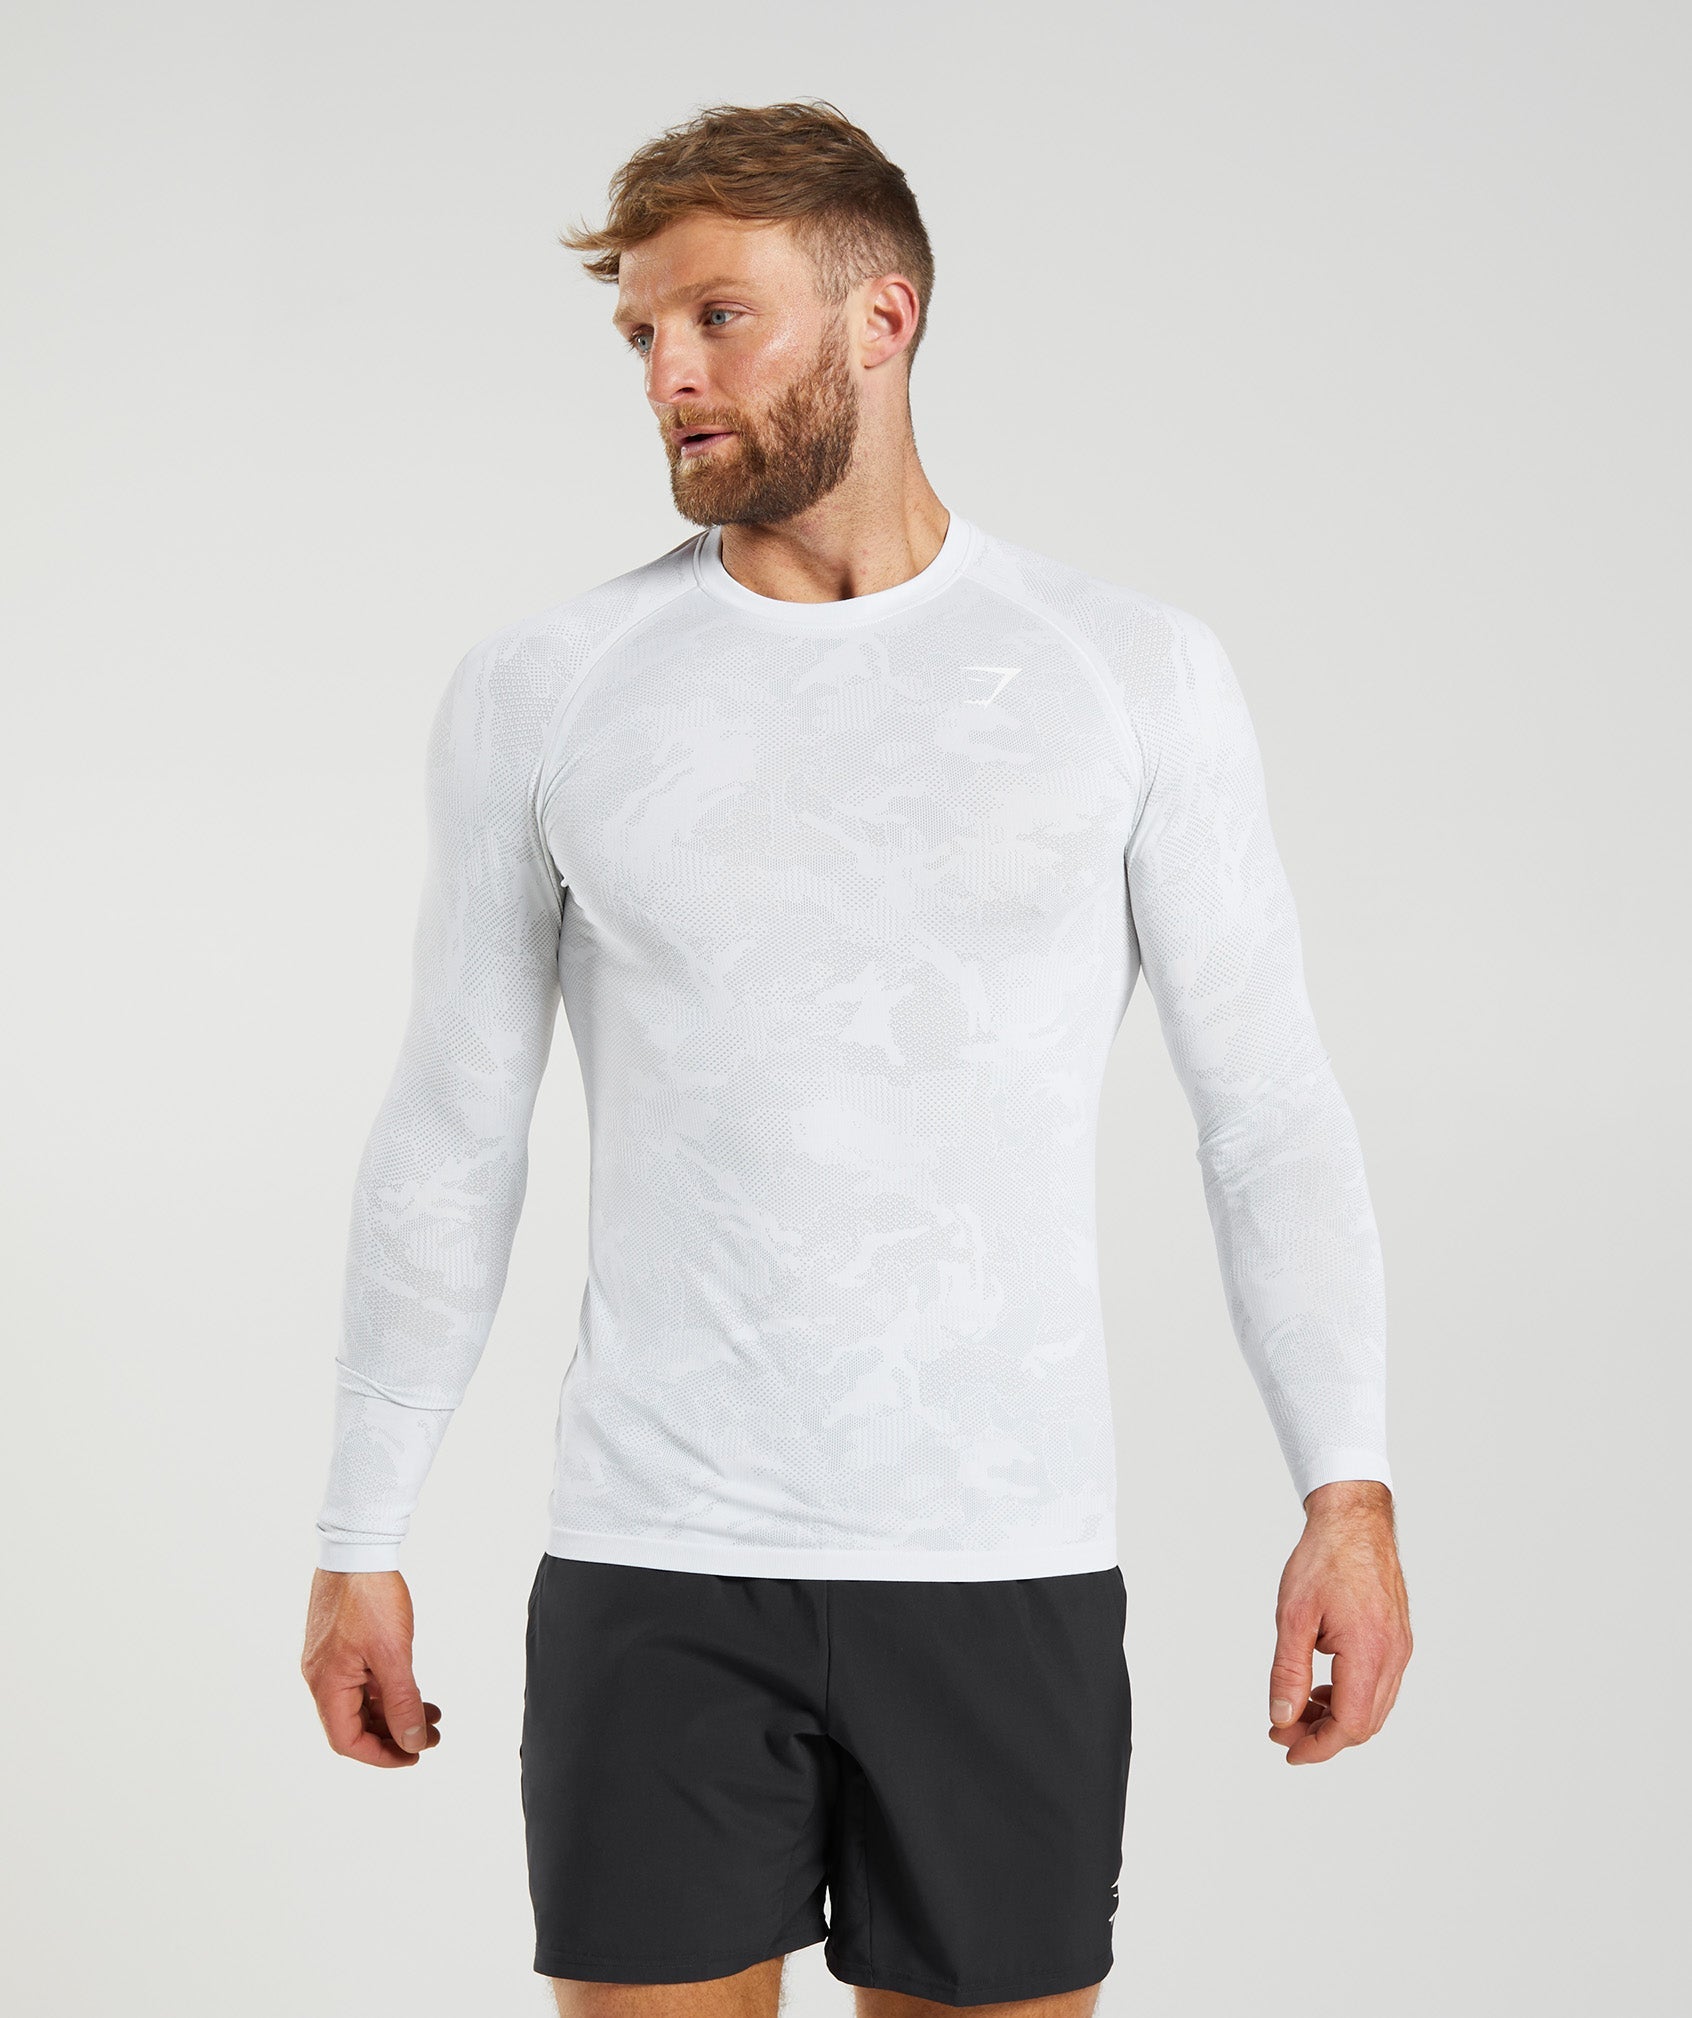 Geo Seamless Long Sleeve T-Shirt in White/Light Grey - view 1